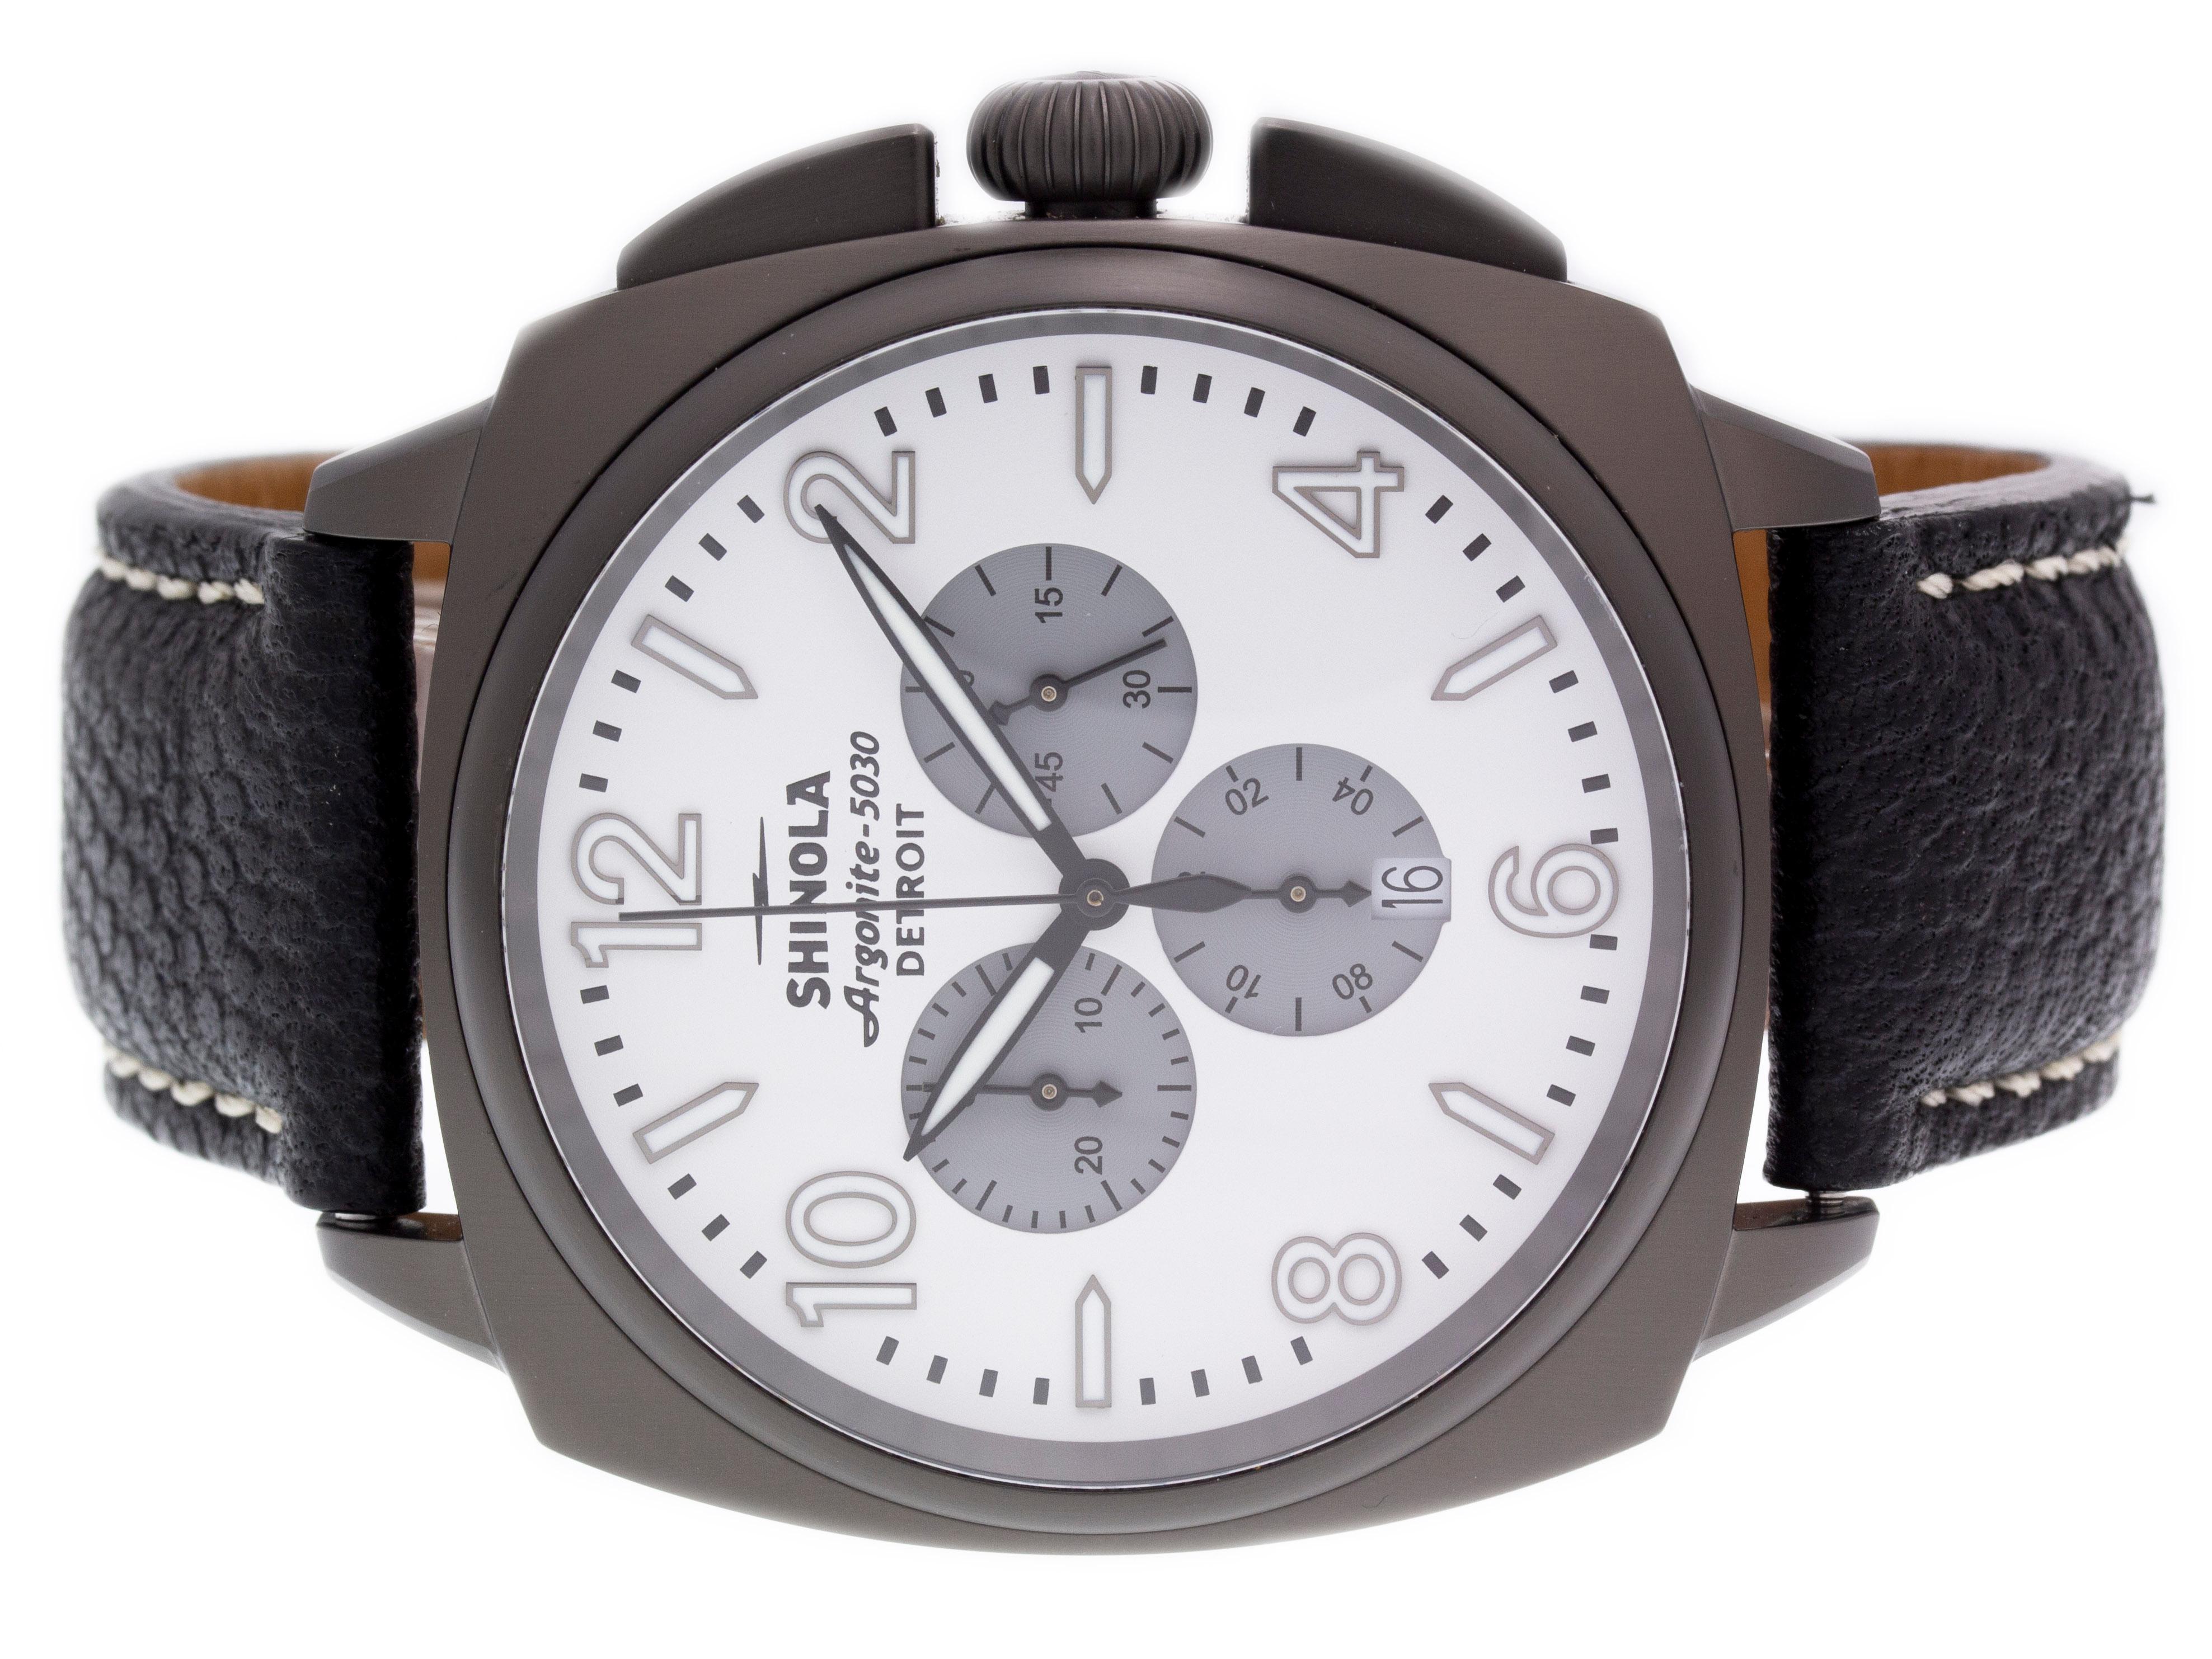 PVD Steel Shinola The Brakeman Chrono watch with a 46mm case, white dial, and black leather strap with tang buckle. Features include hours, minutes, seconds, date, and chronograph. Comes with a Deluxe Gift Box and 2 Year Store